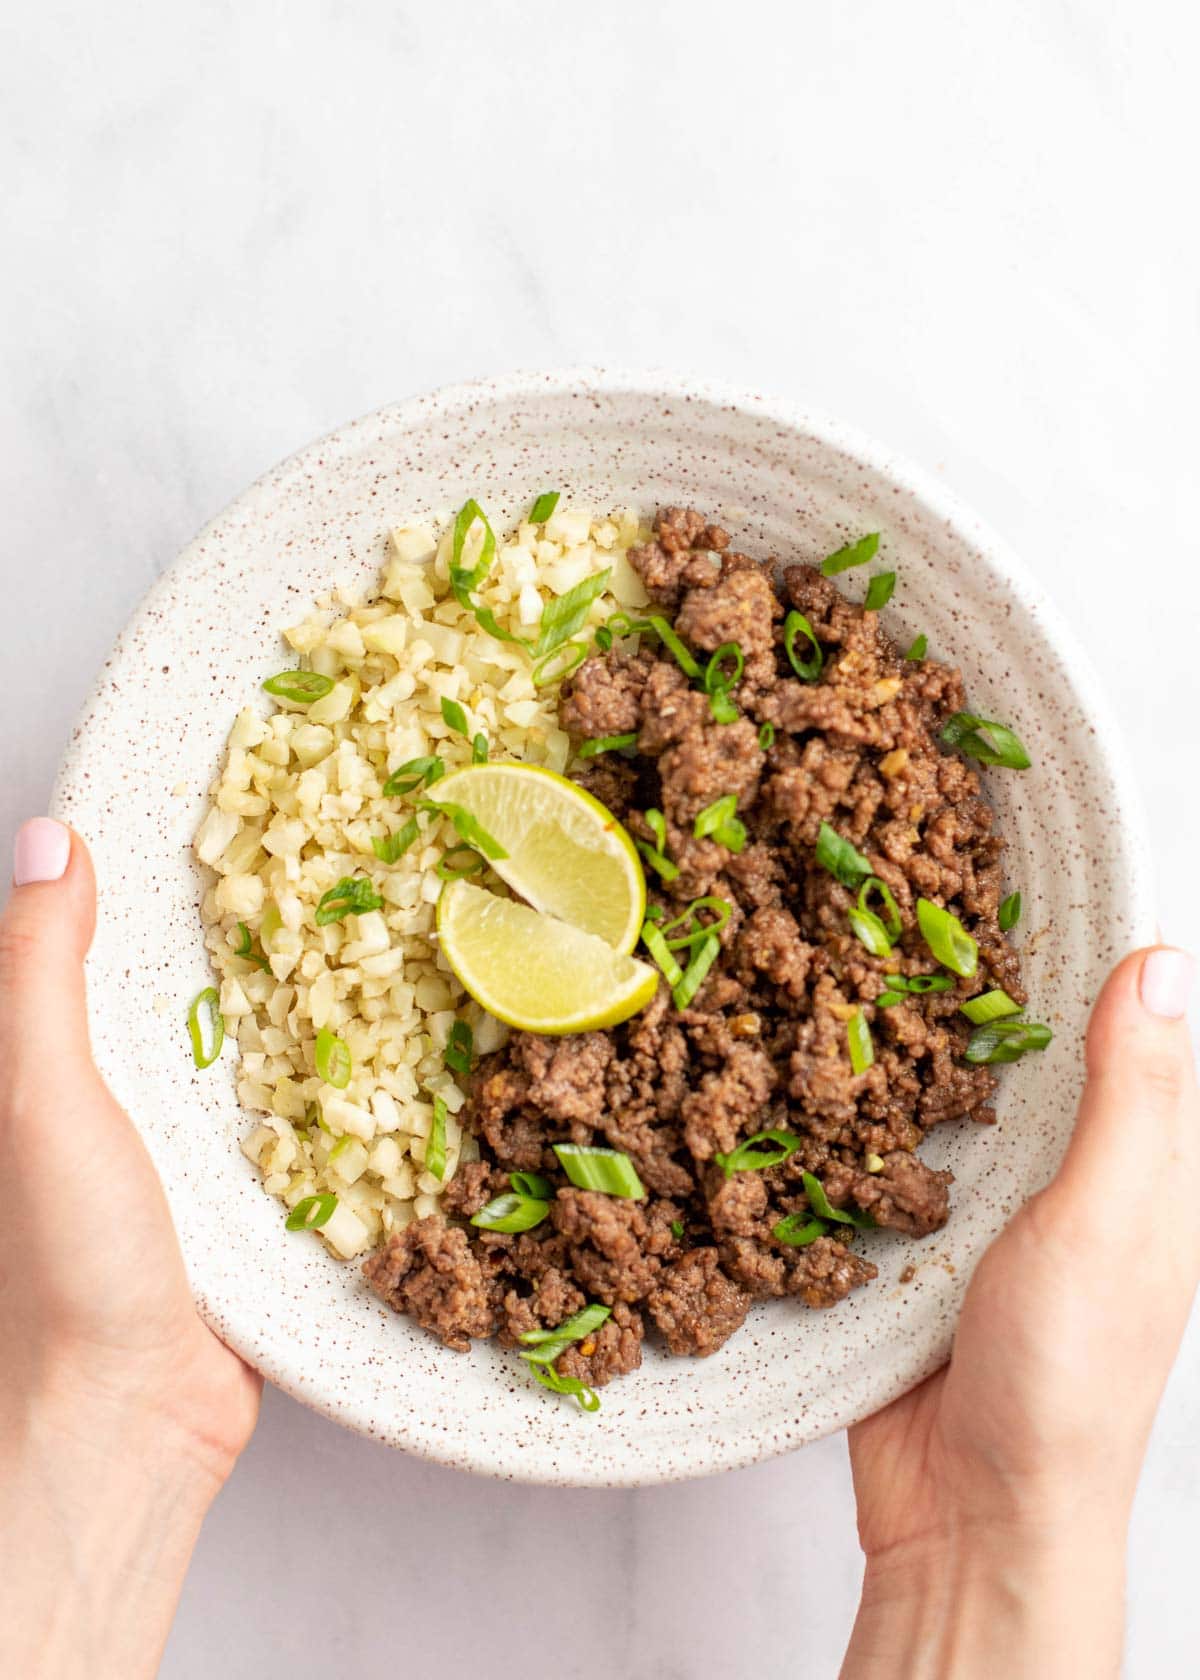 This Korean Beef is a one-pan dish that is ready in 25 minutes! Tender beef is cooked in a flavorful Korean-inspired sauce that pairs perfectly with cauliflower rice! You can enjoy a serving of this tasty dish for just 3 net carbs!